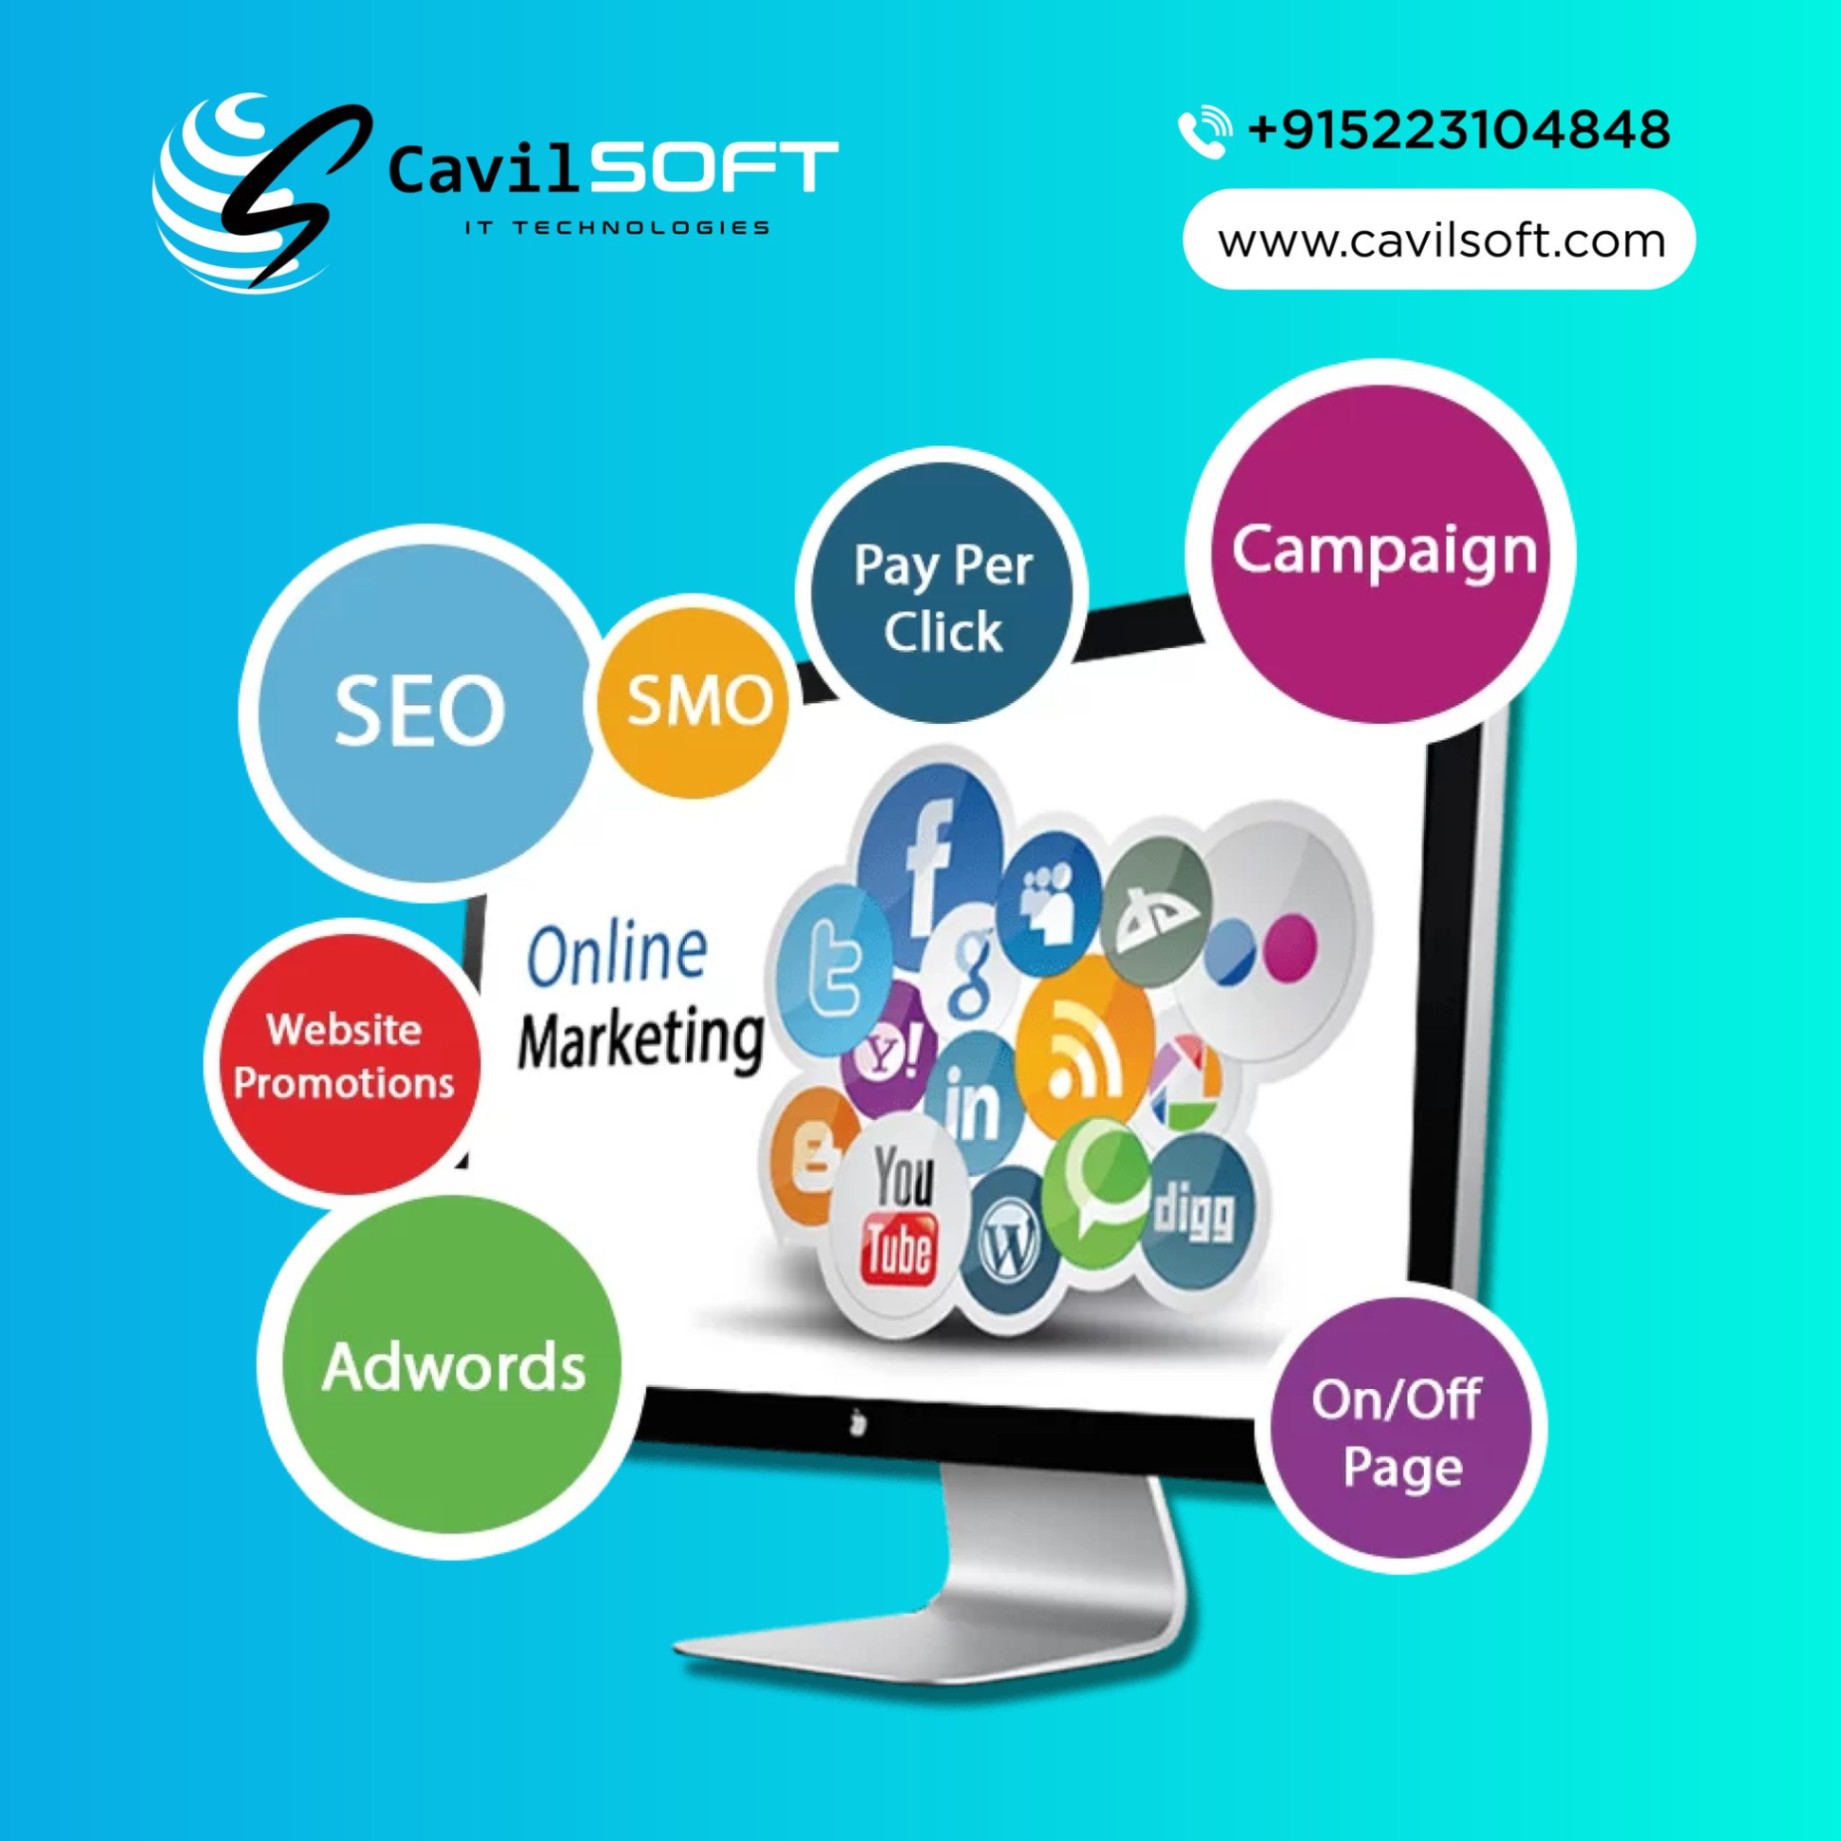 CavilSoft: Elevating Your Digital Presence - Leading Digital Marketing, Web Design, Graphic Design, and SEO Services in india